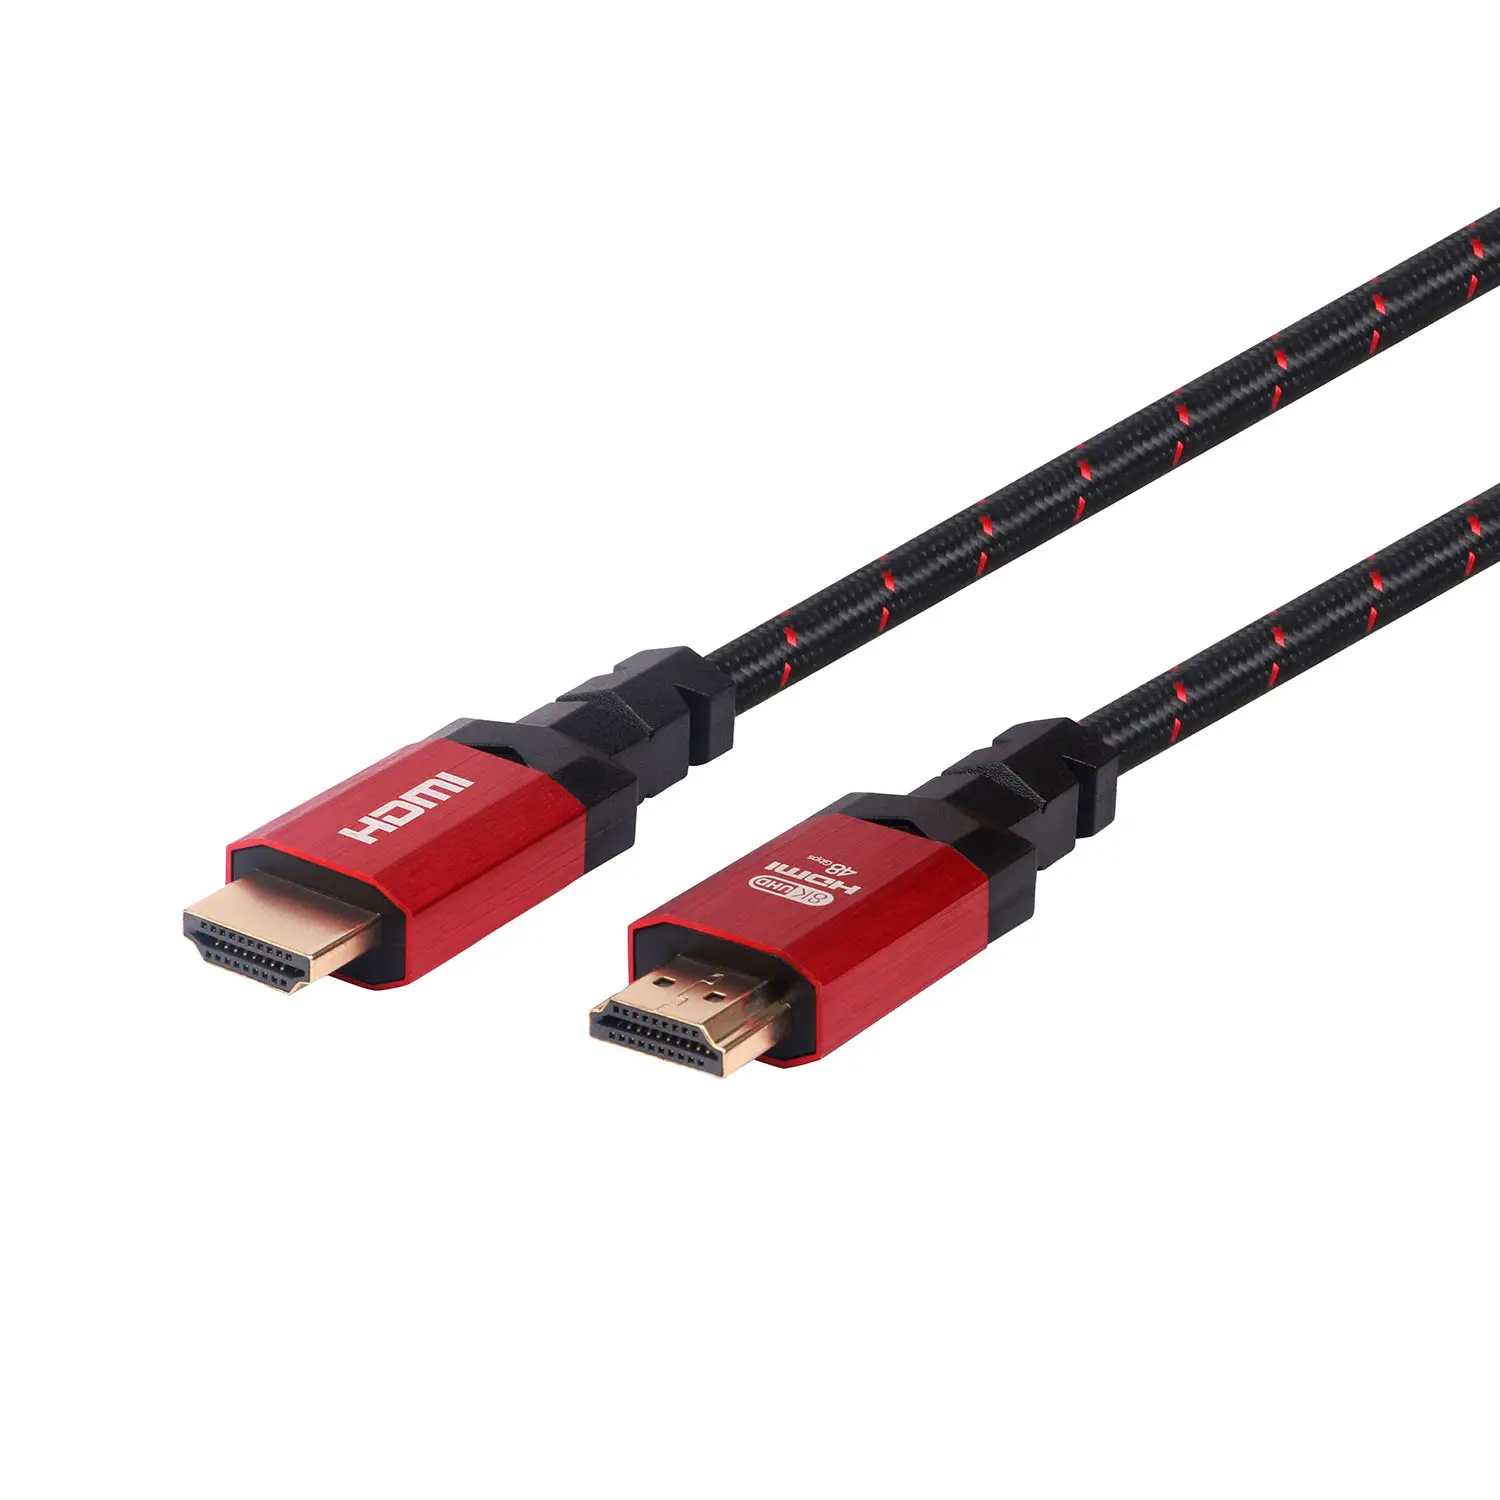 Vietnam CE Certification High Speed 48Gbps HDMICable Support Dynamic HDR TDR 8K 60Hz 4K 120Hz Resolution Multimedia Cable